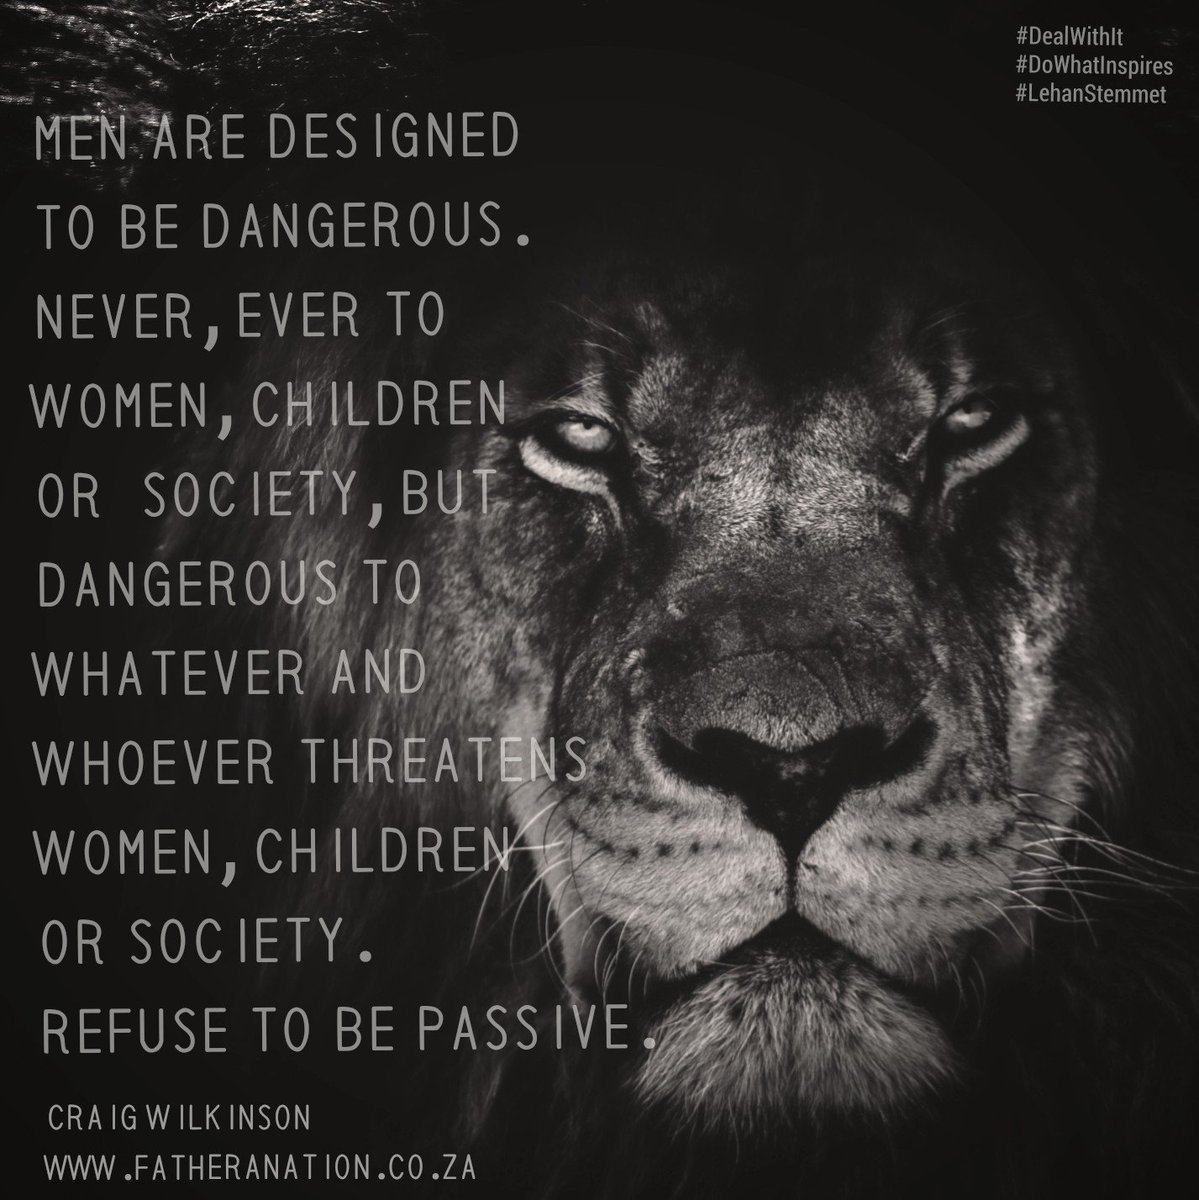 #FatherANation #CraigWilkinson @FatherANationSA @DadCoach #dangerous #DealWithIt #DoWhatInspires #Dad #Father #FatherDaughter #FatherSon #RealMan #Grit #Resilience #Purpose #Meaning #Significance